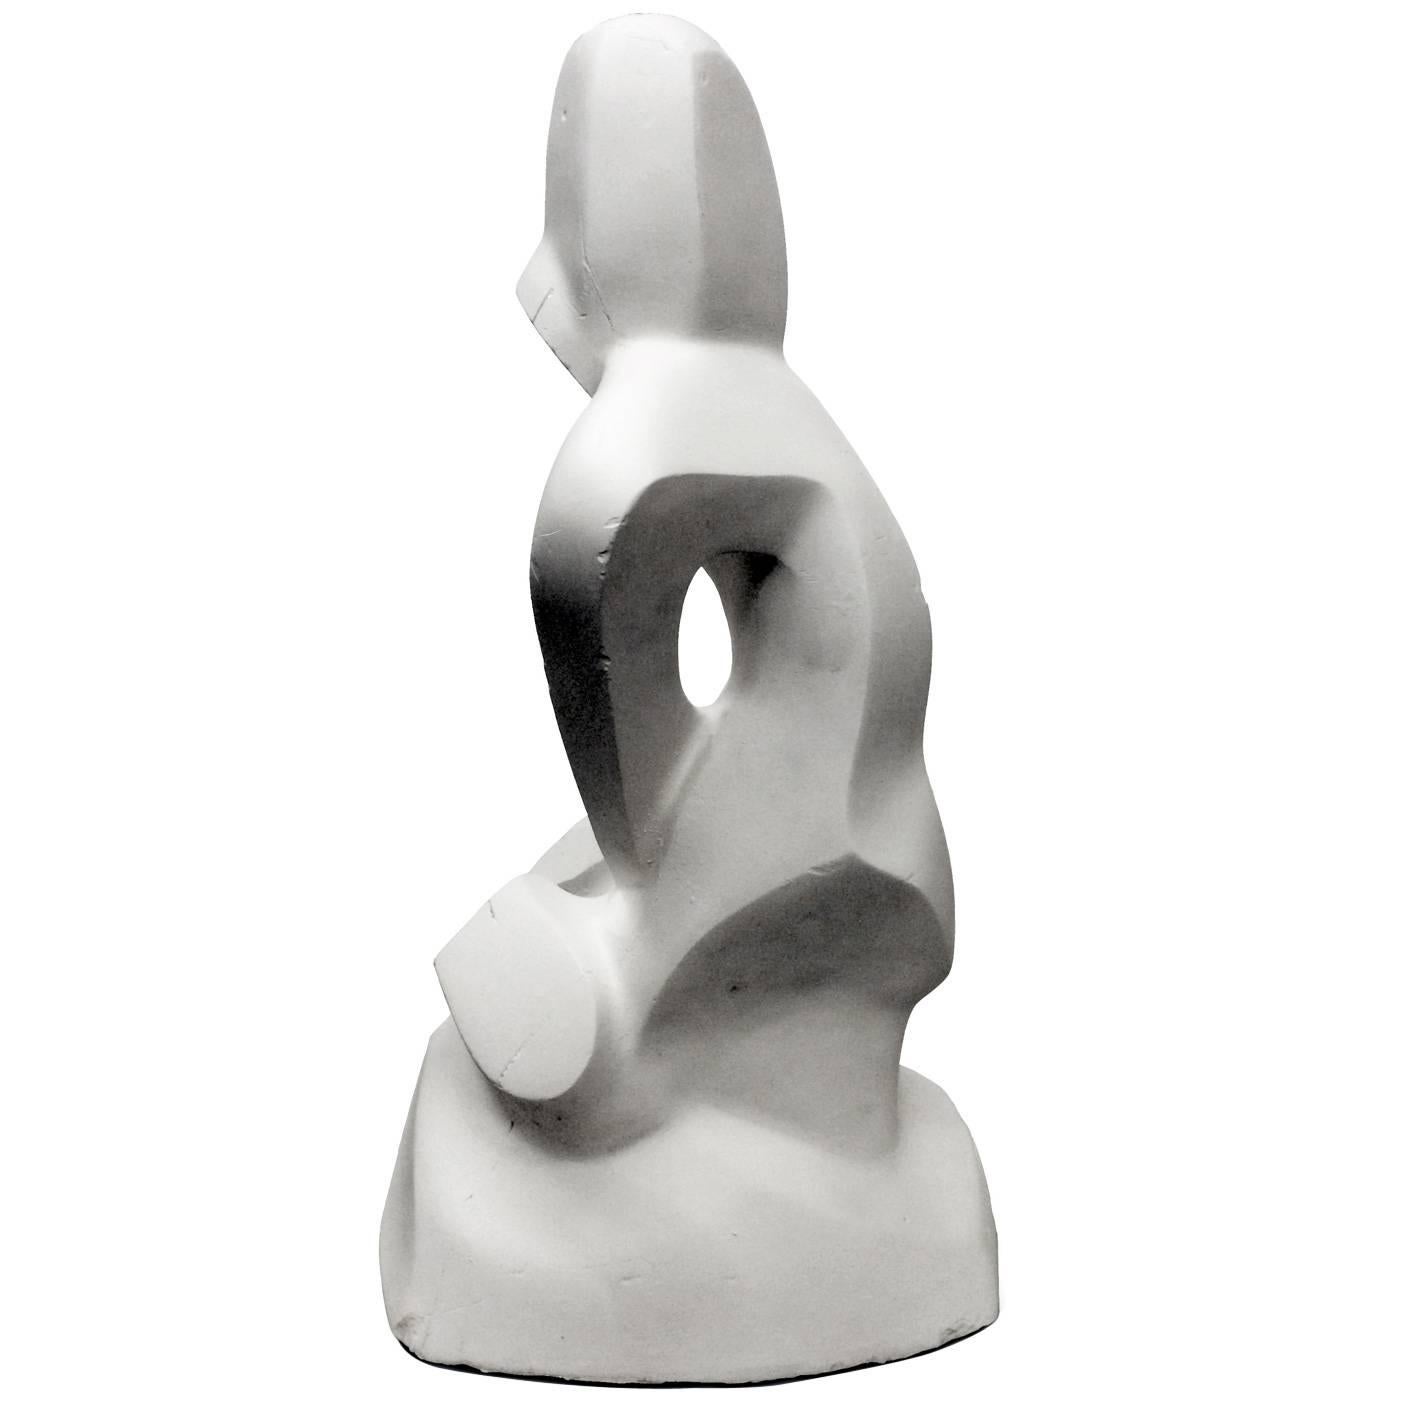 "Plaster Maquette #1, " by Seymour Meyer